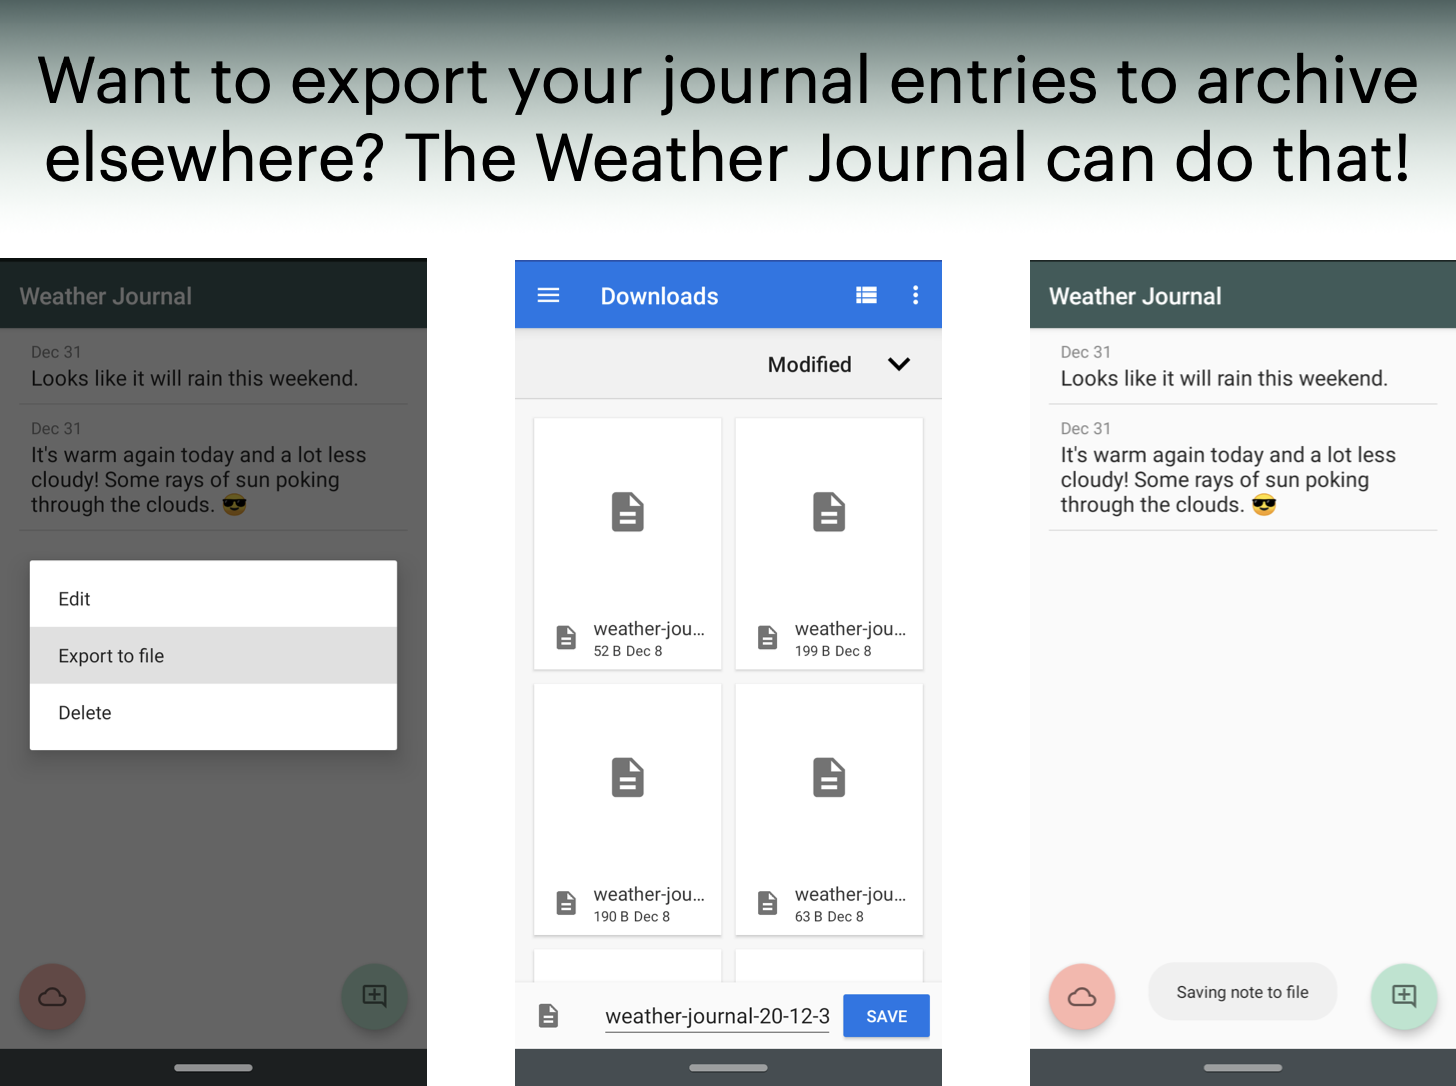 Want to export your journal entries to archive elsewhere? The Weather Journal can do that!